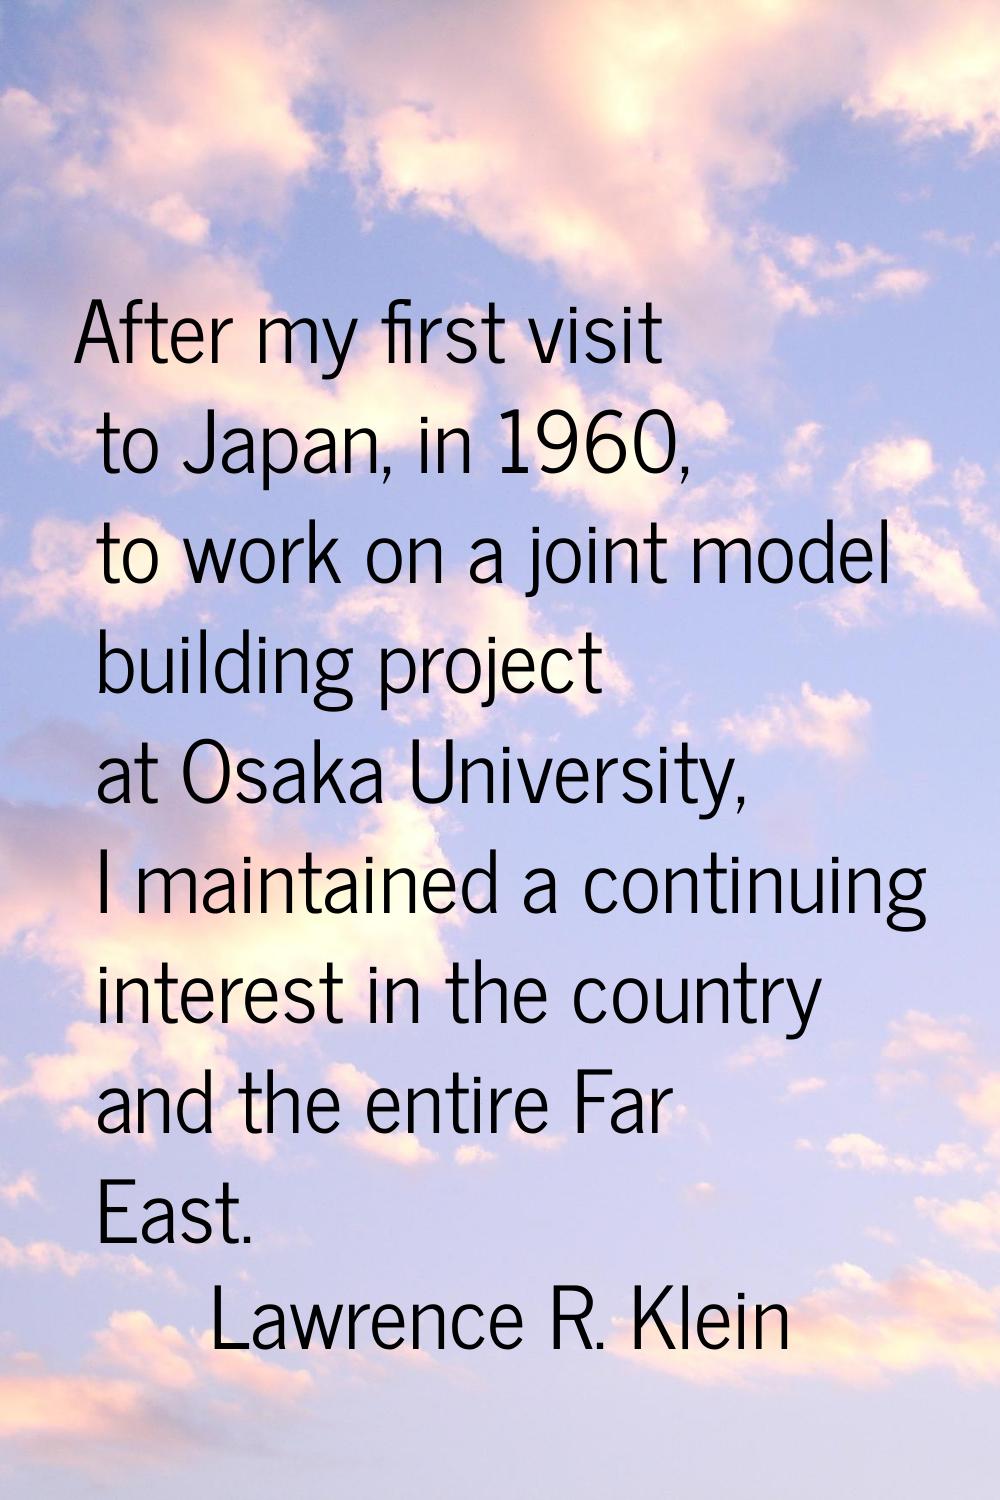 After my first visit to Japan, in 1960, to work on a joint model building project at Osaka Universi